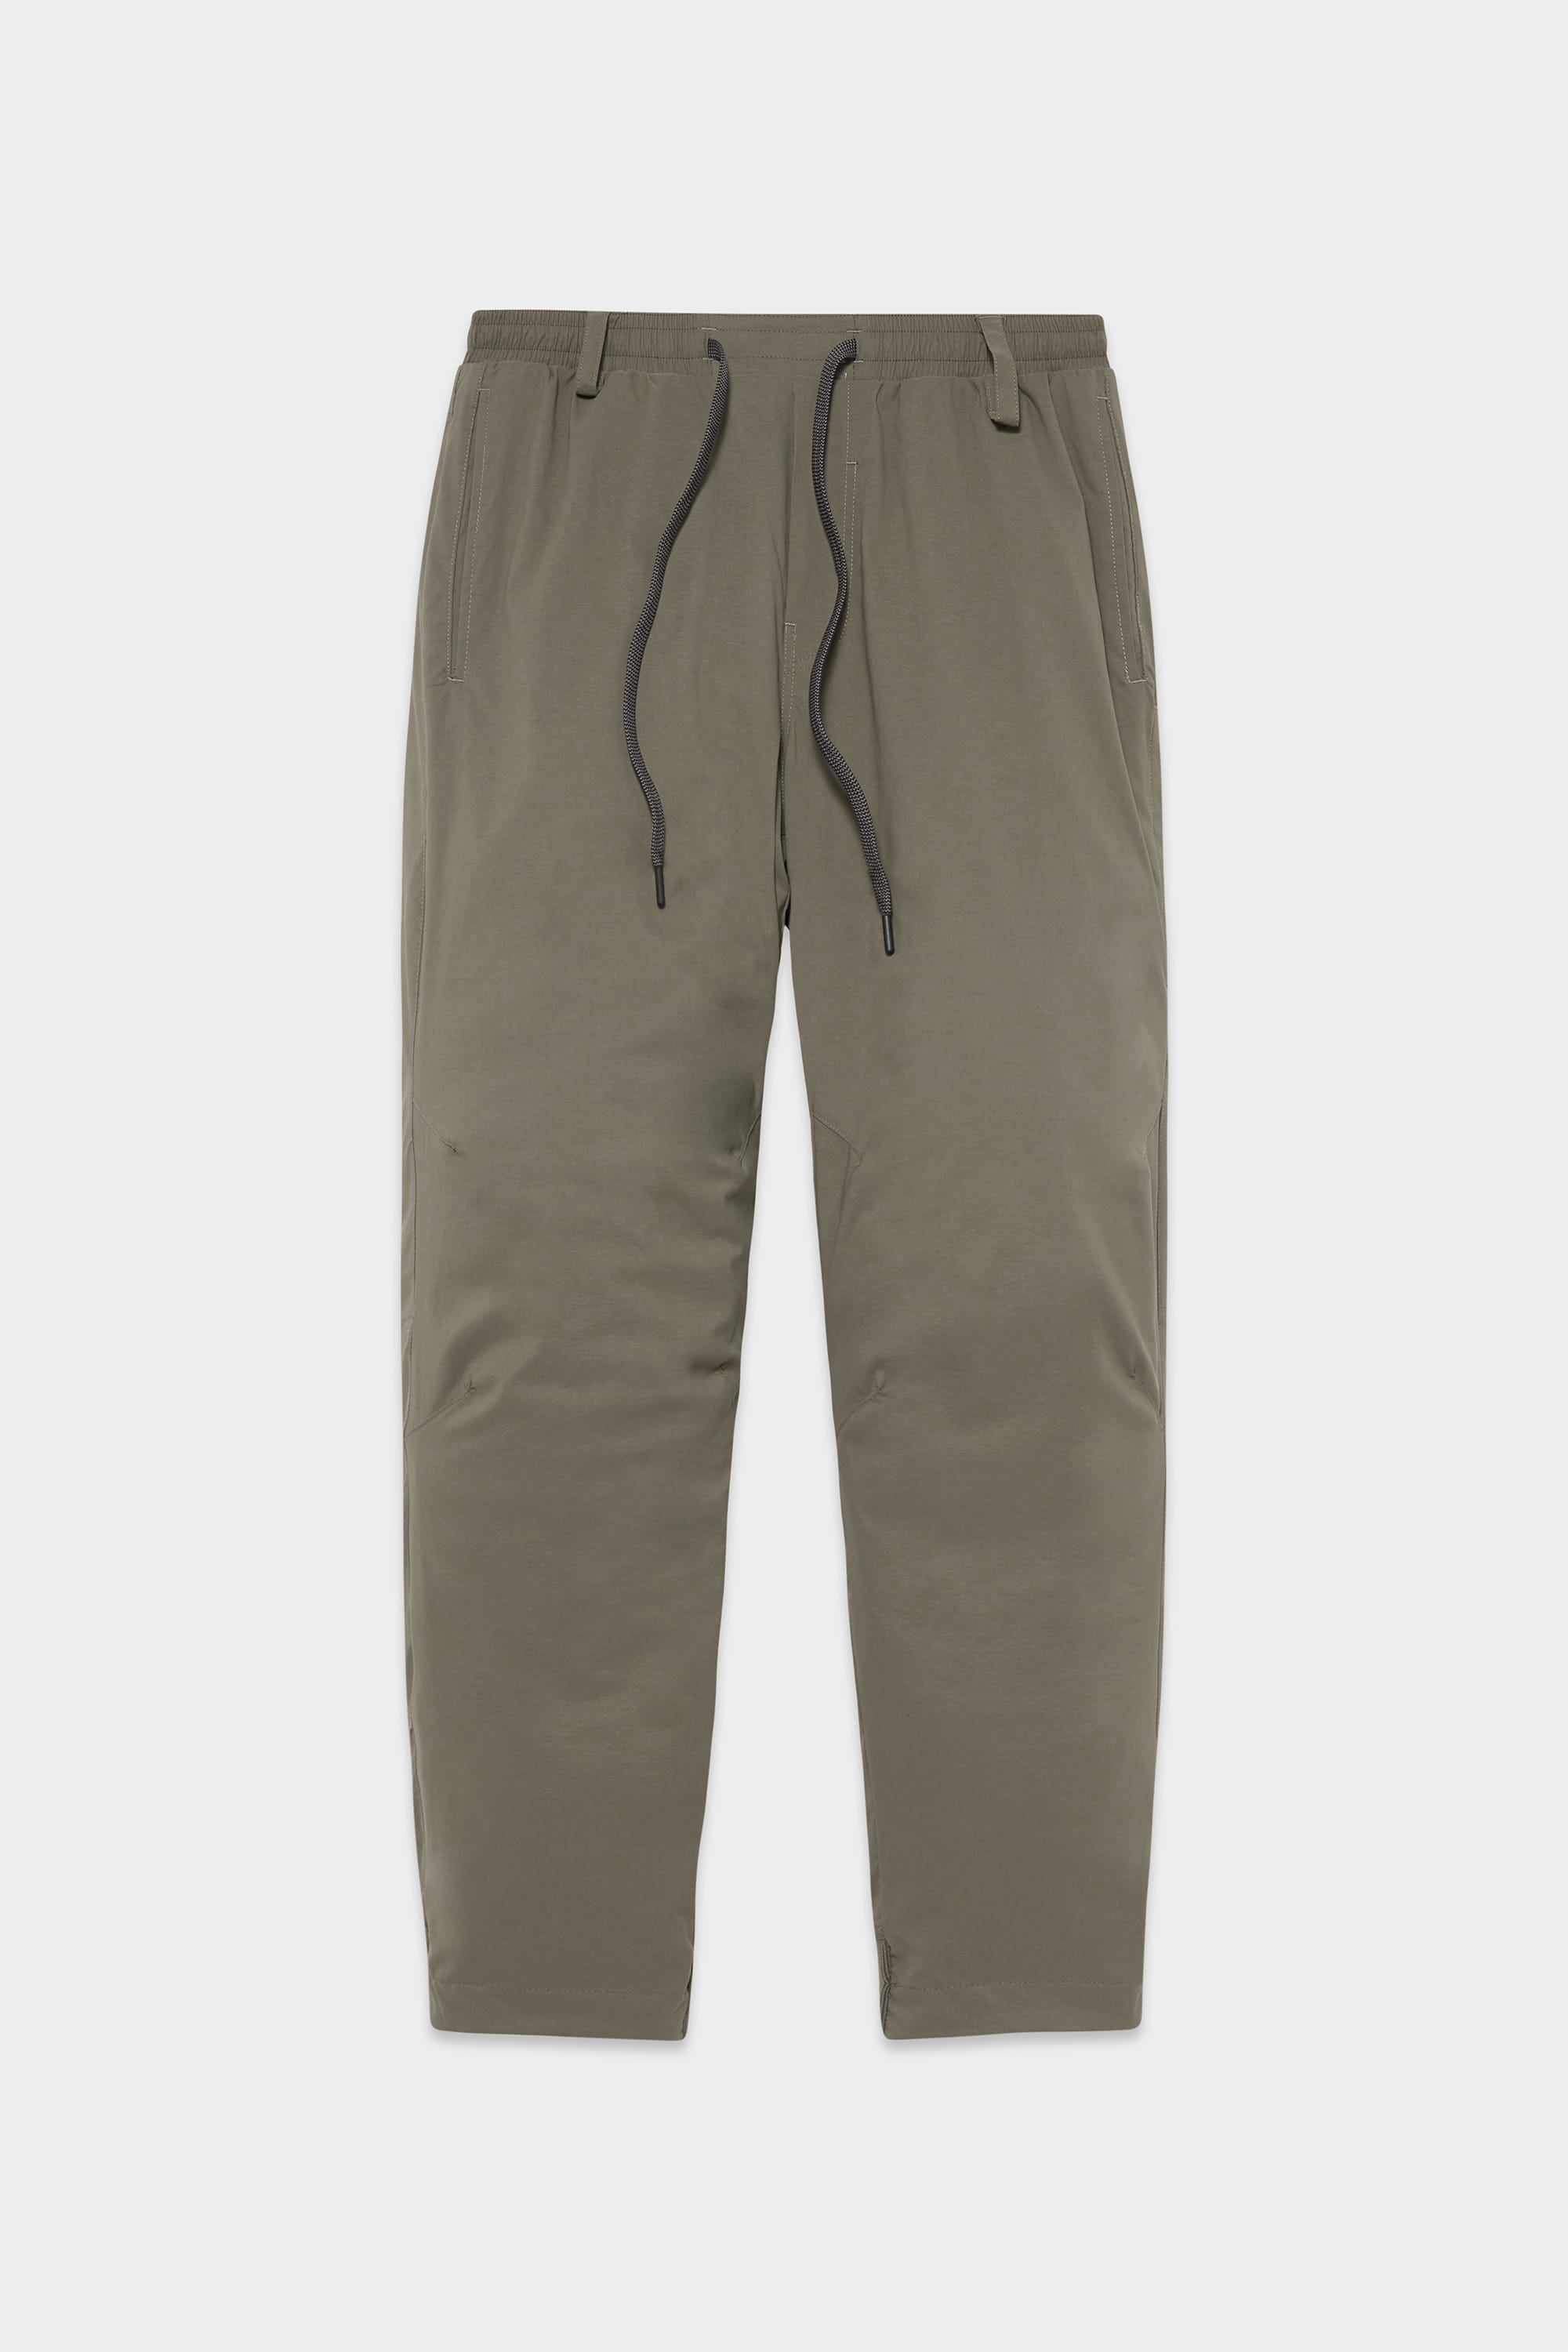 686 Mens Thermadry MerinoLined Insulated Pant  686com